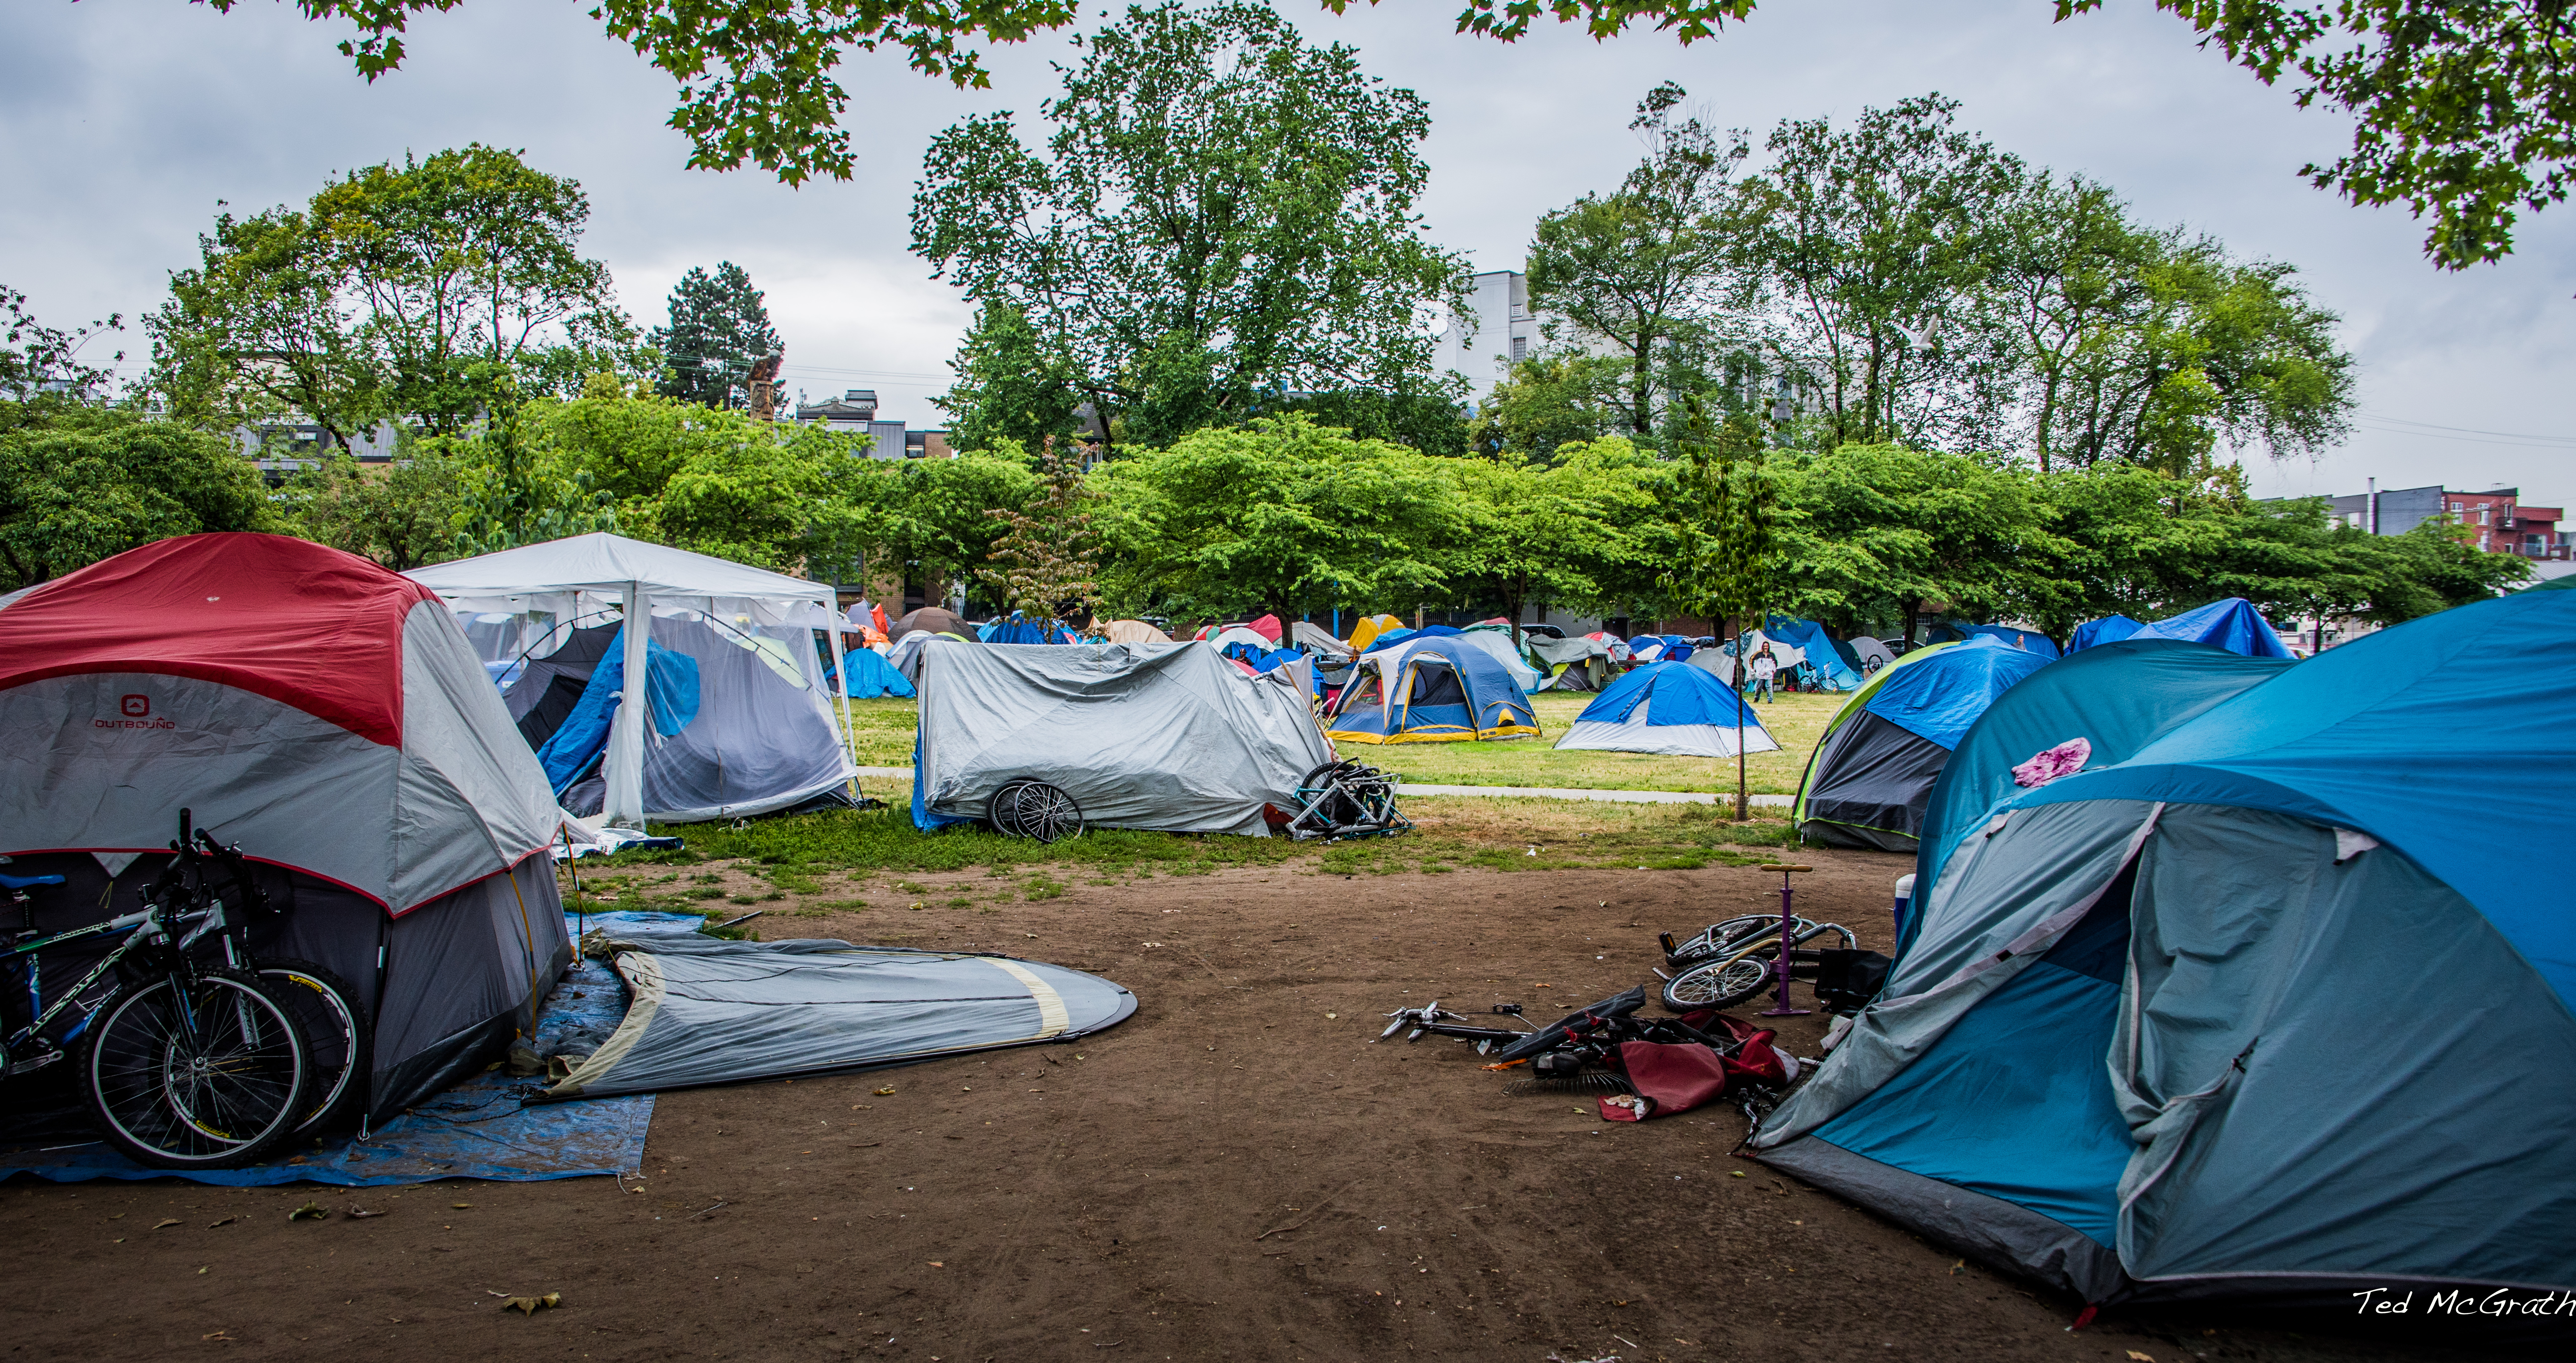 This is a photo of the CRAB Park tent city in Vancouver. There are multiple tents on a green grass space. No people can be seen.